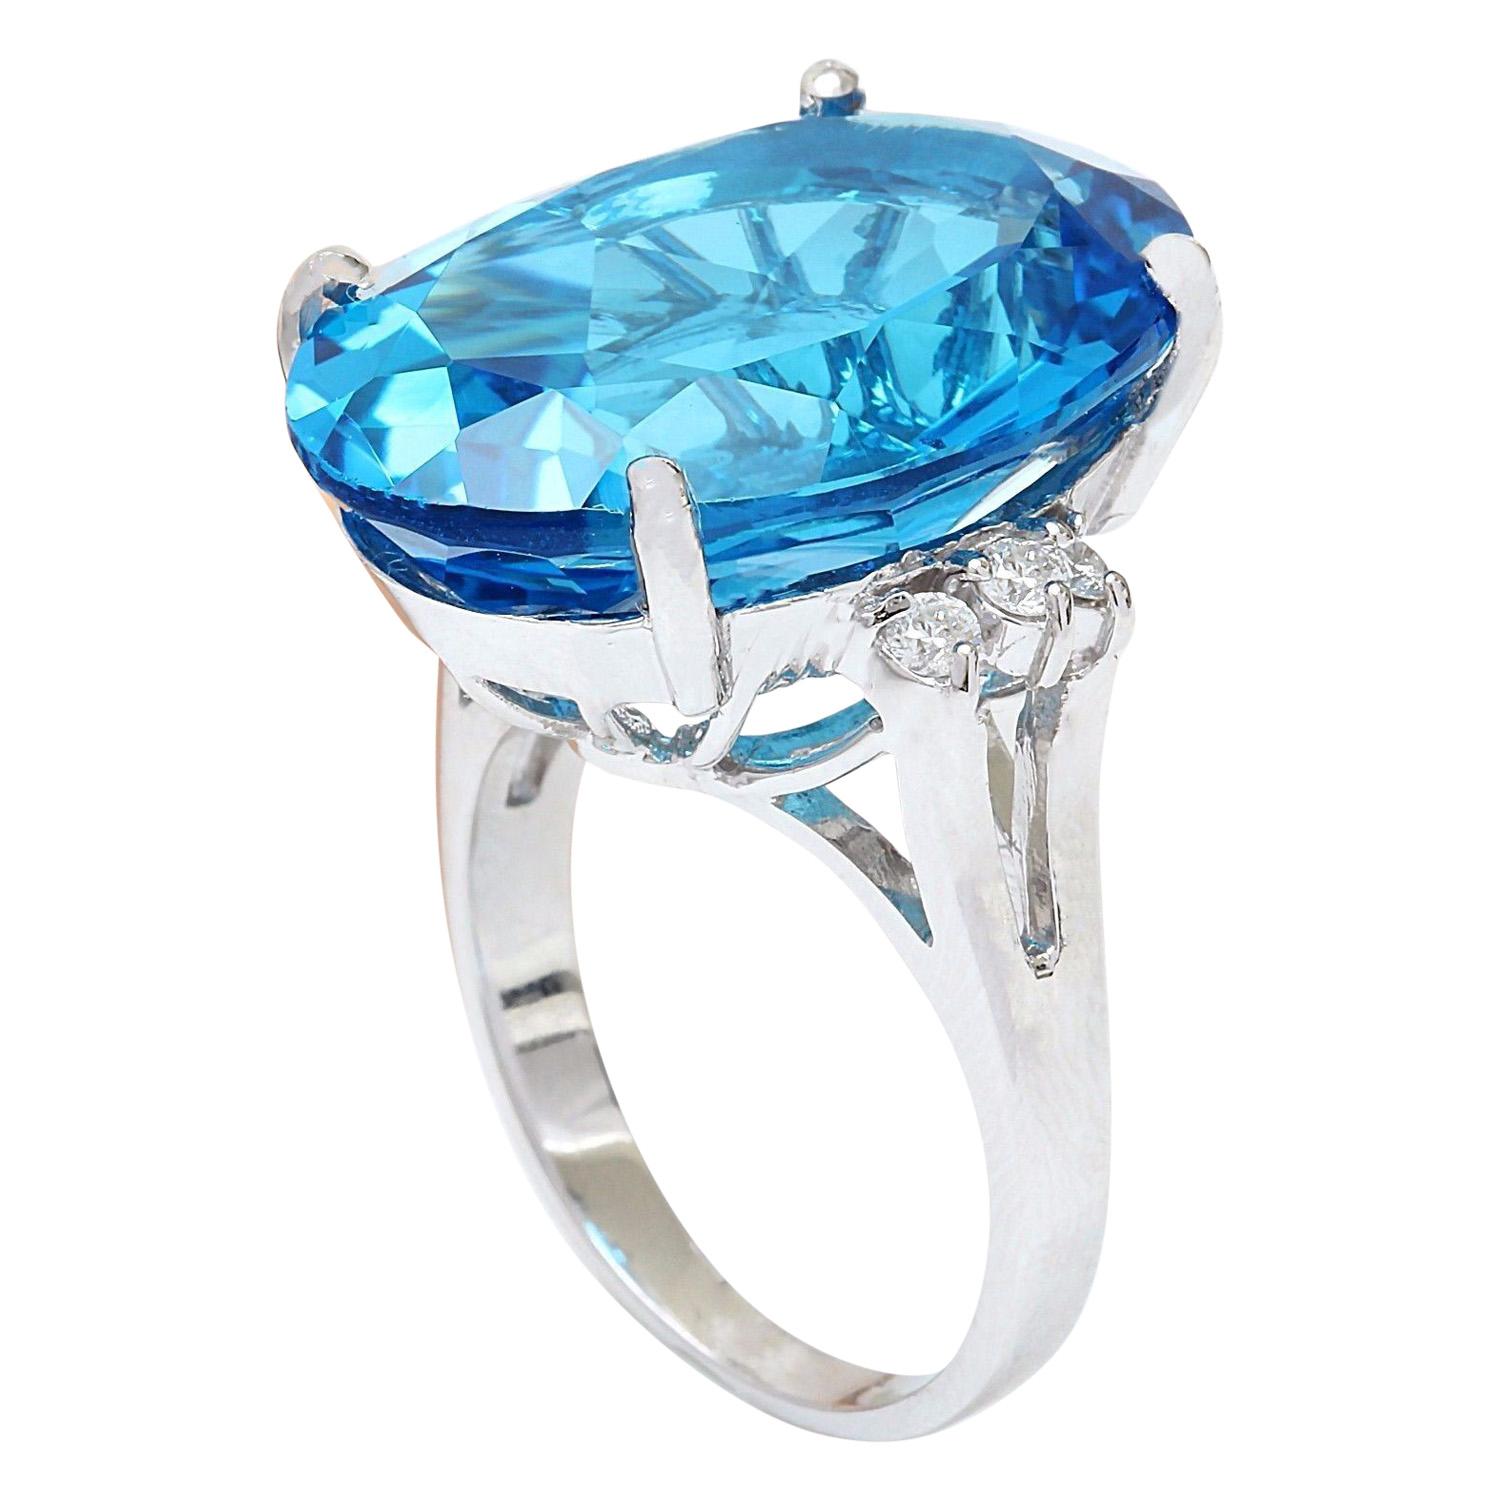 23.15 Carat Natural Topaz 14 Karat Solid White Gold Diamond Ring In New Condition For Sale In Los Angeles, CA